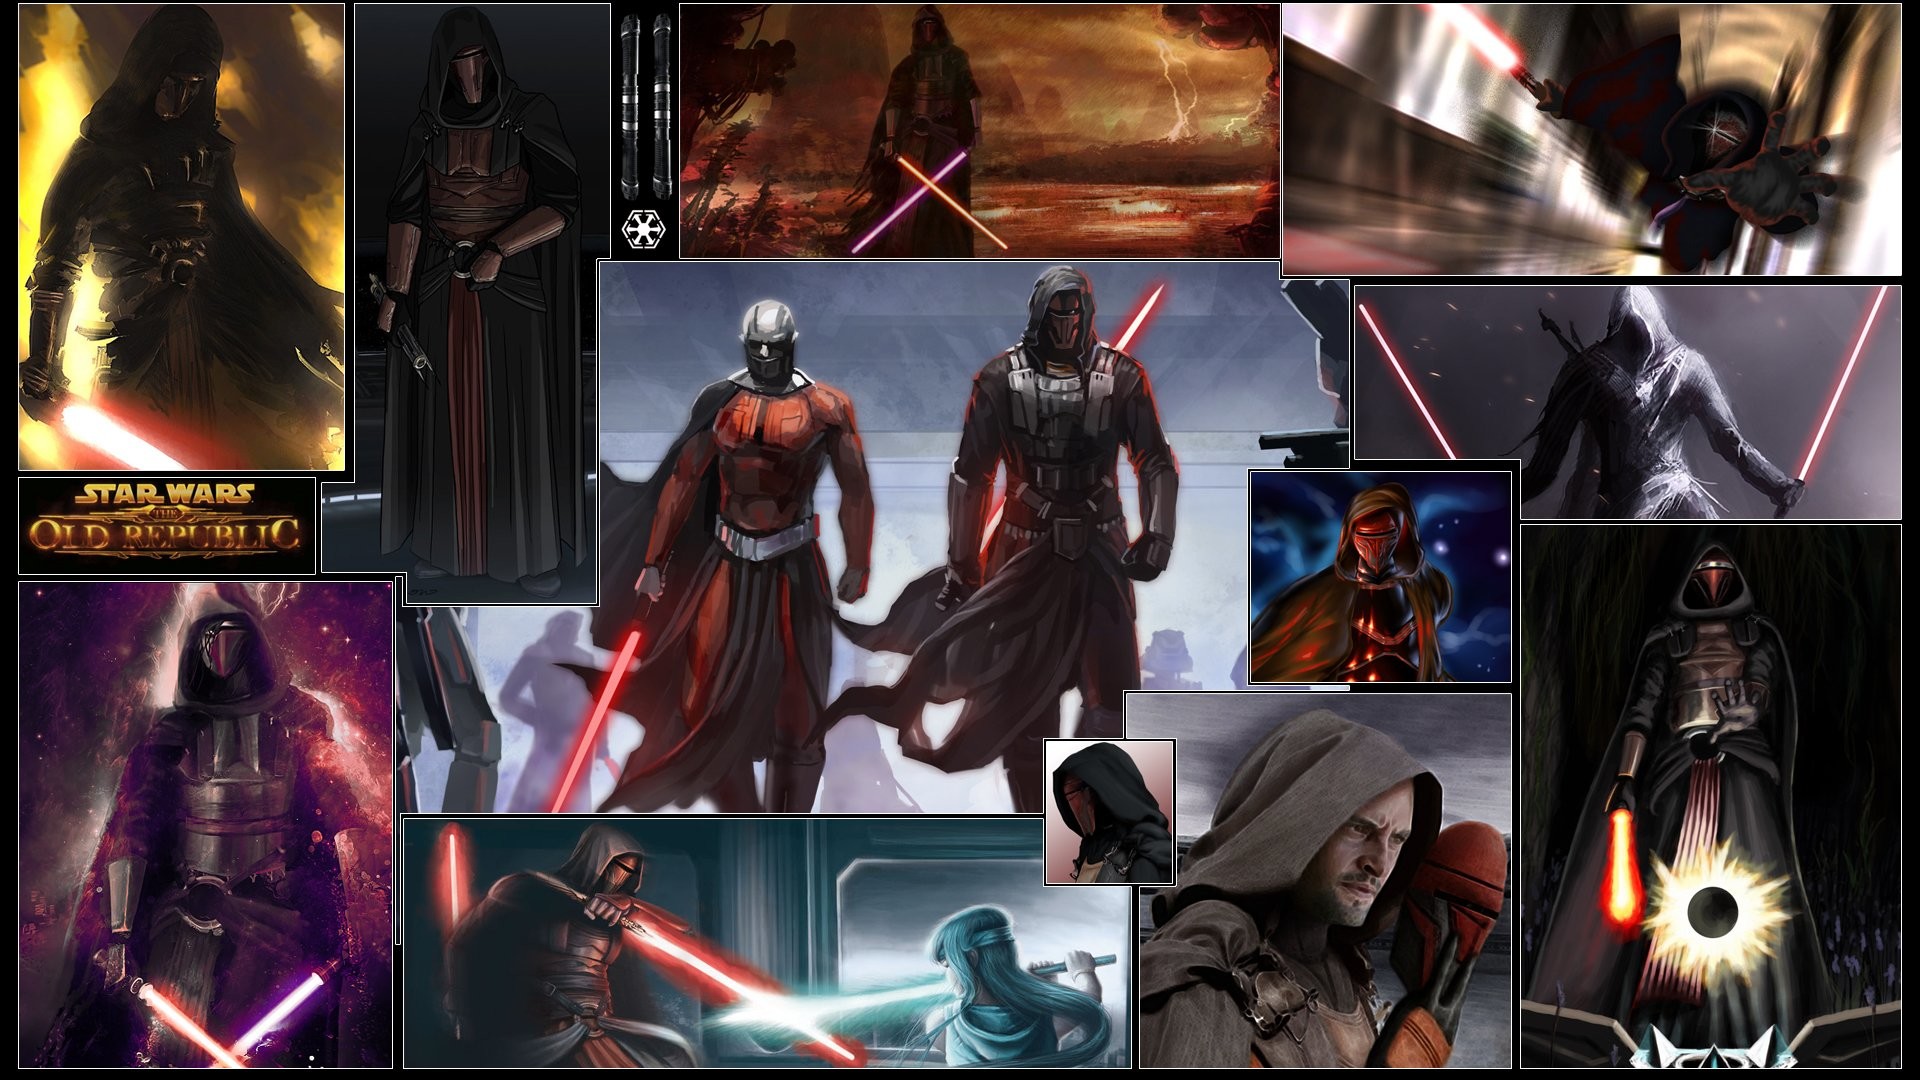 Video Game – Star Wars: The Old Republic Wallpaper